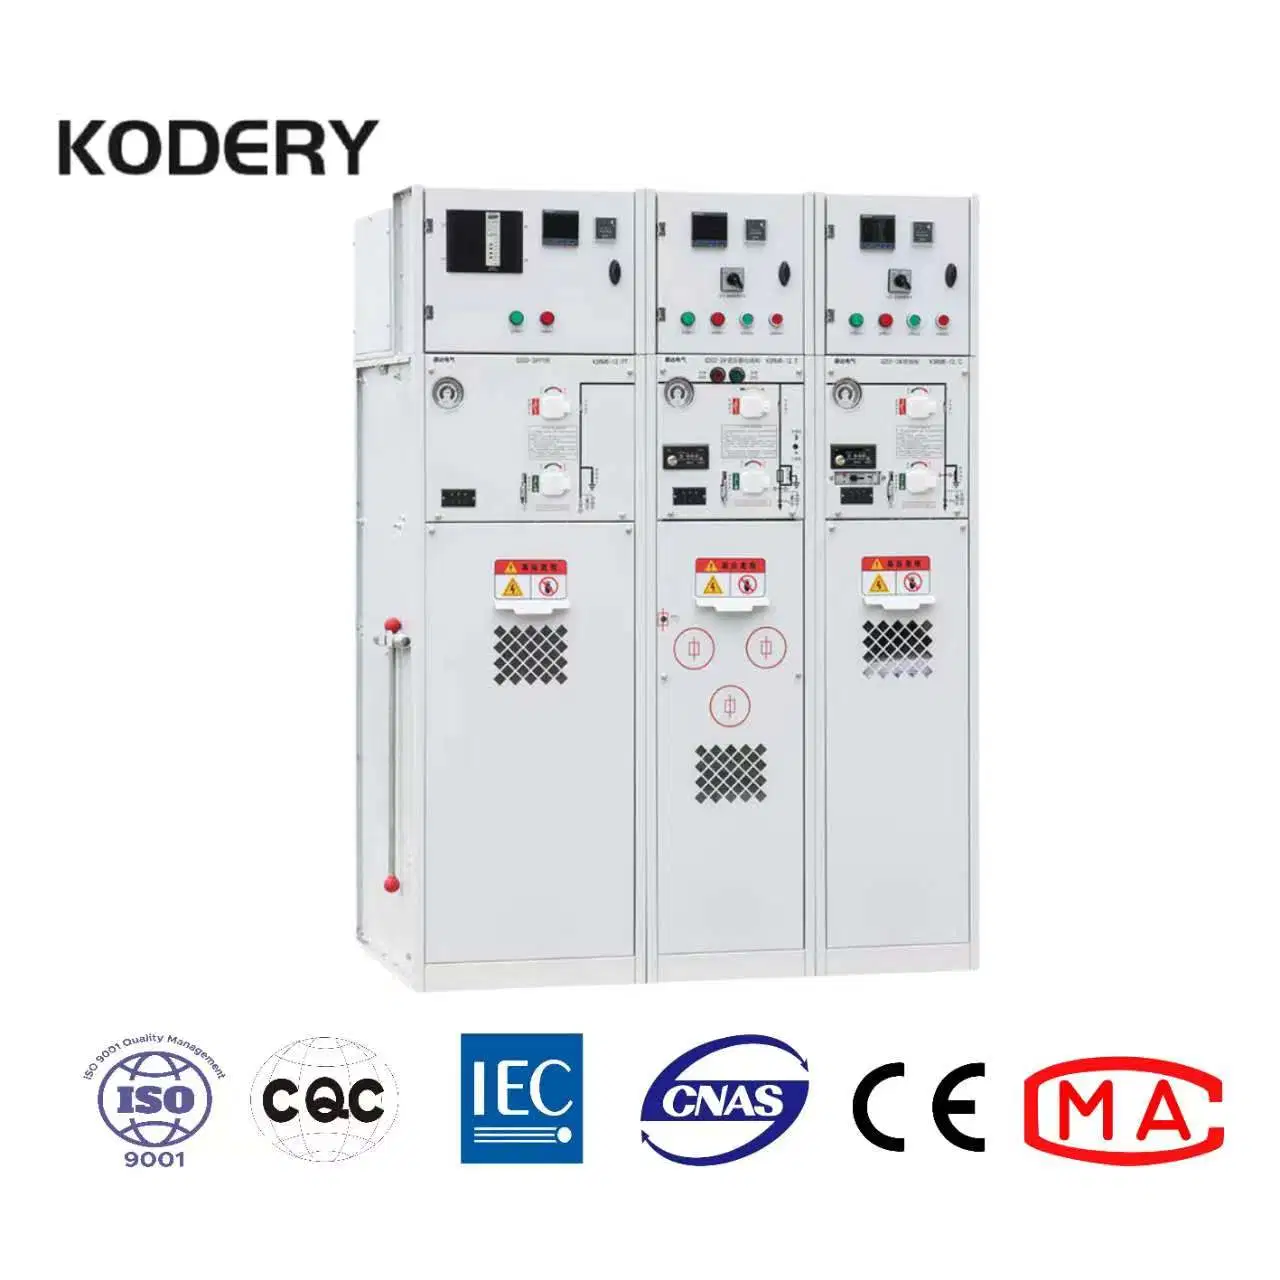 Kodery Xgn15-12 24 Metal Closed Ring Network Gas Insulated Swithgear